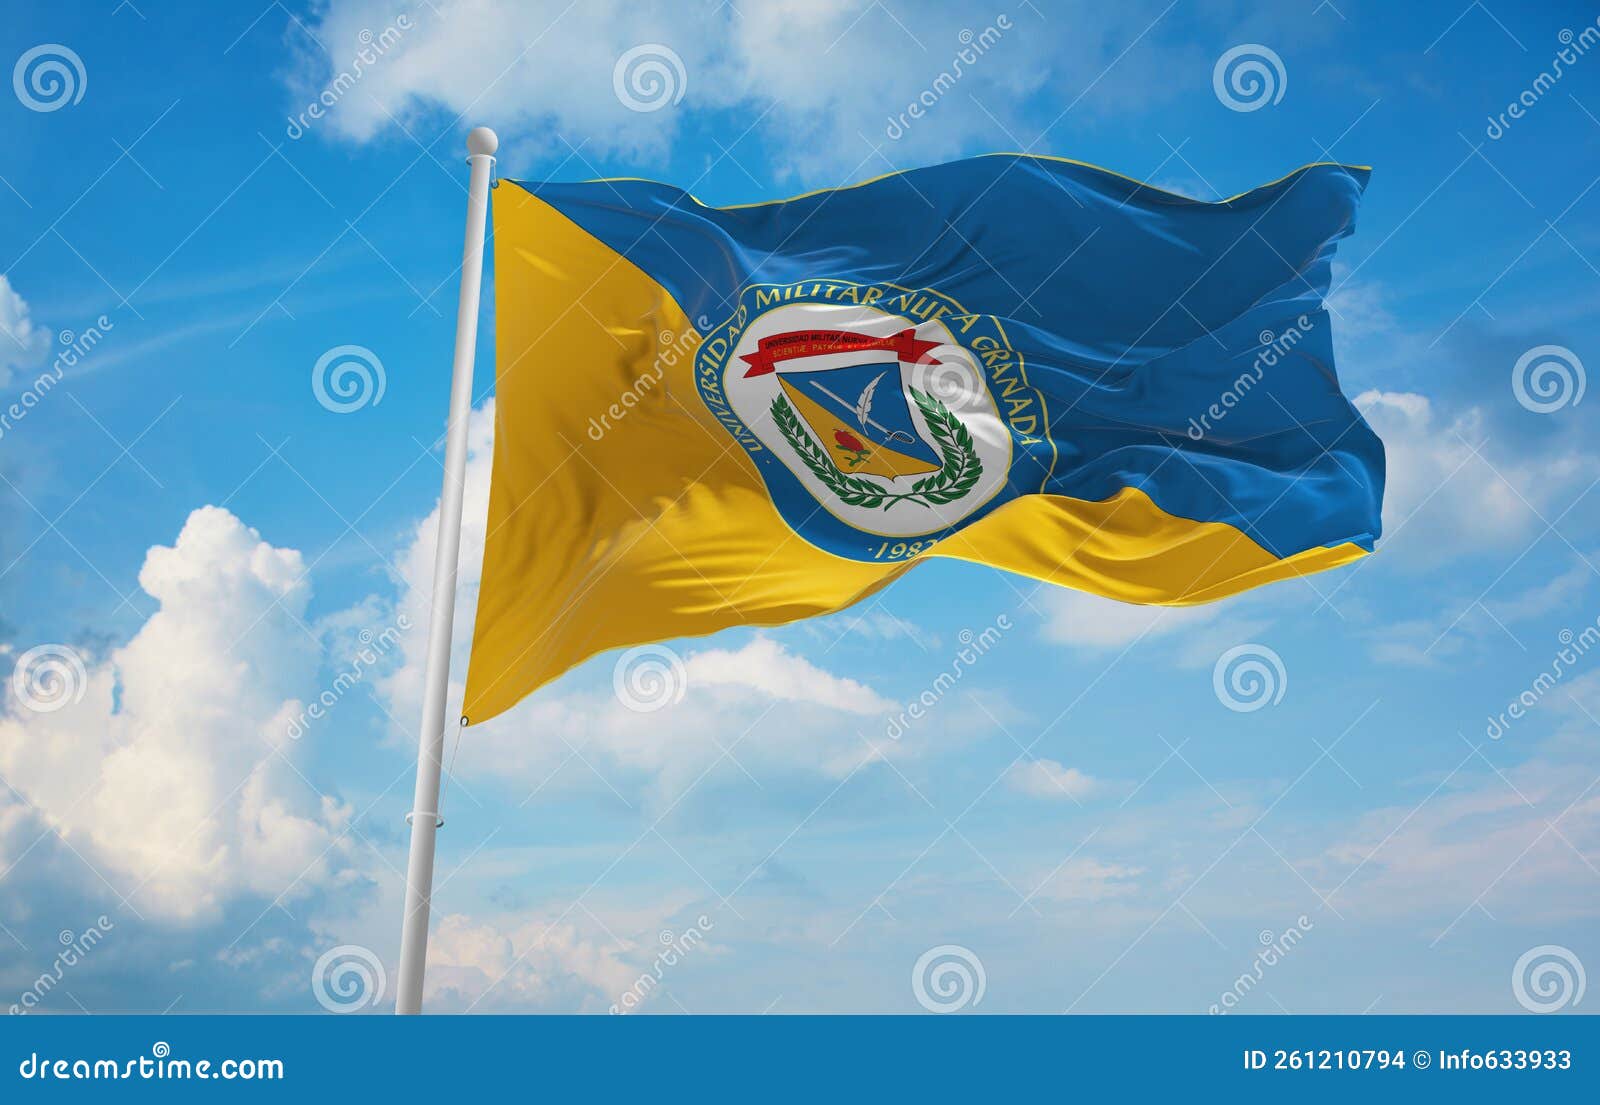 flag of bandera universidad militar nueva granada , colombia at cloudy sky background on sunset, panoramic view. colombian travel